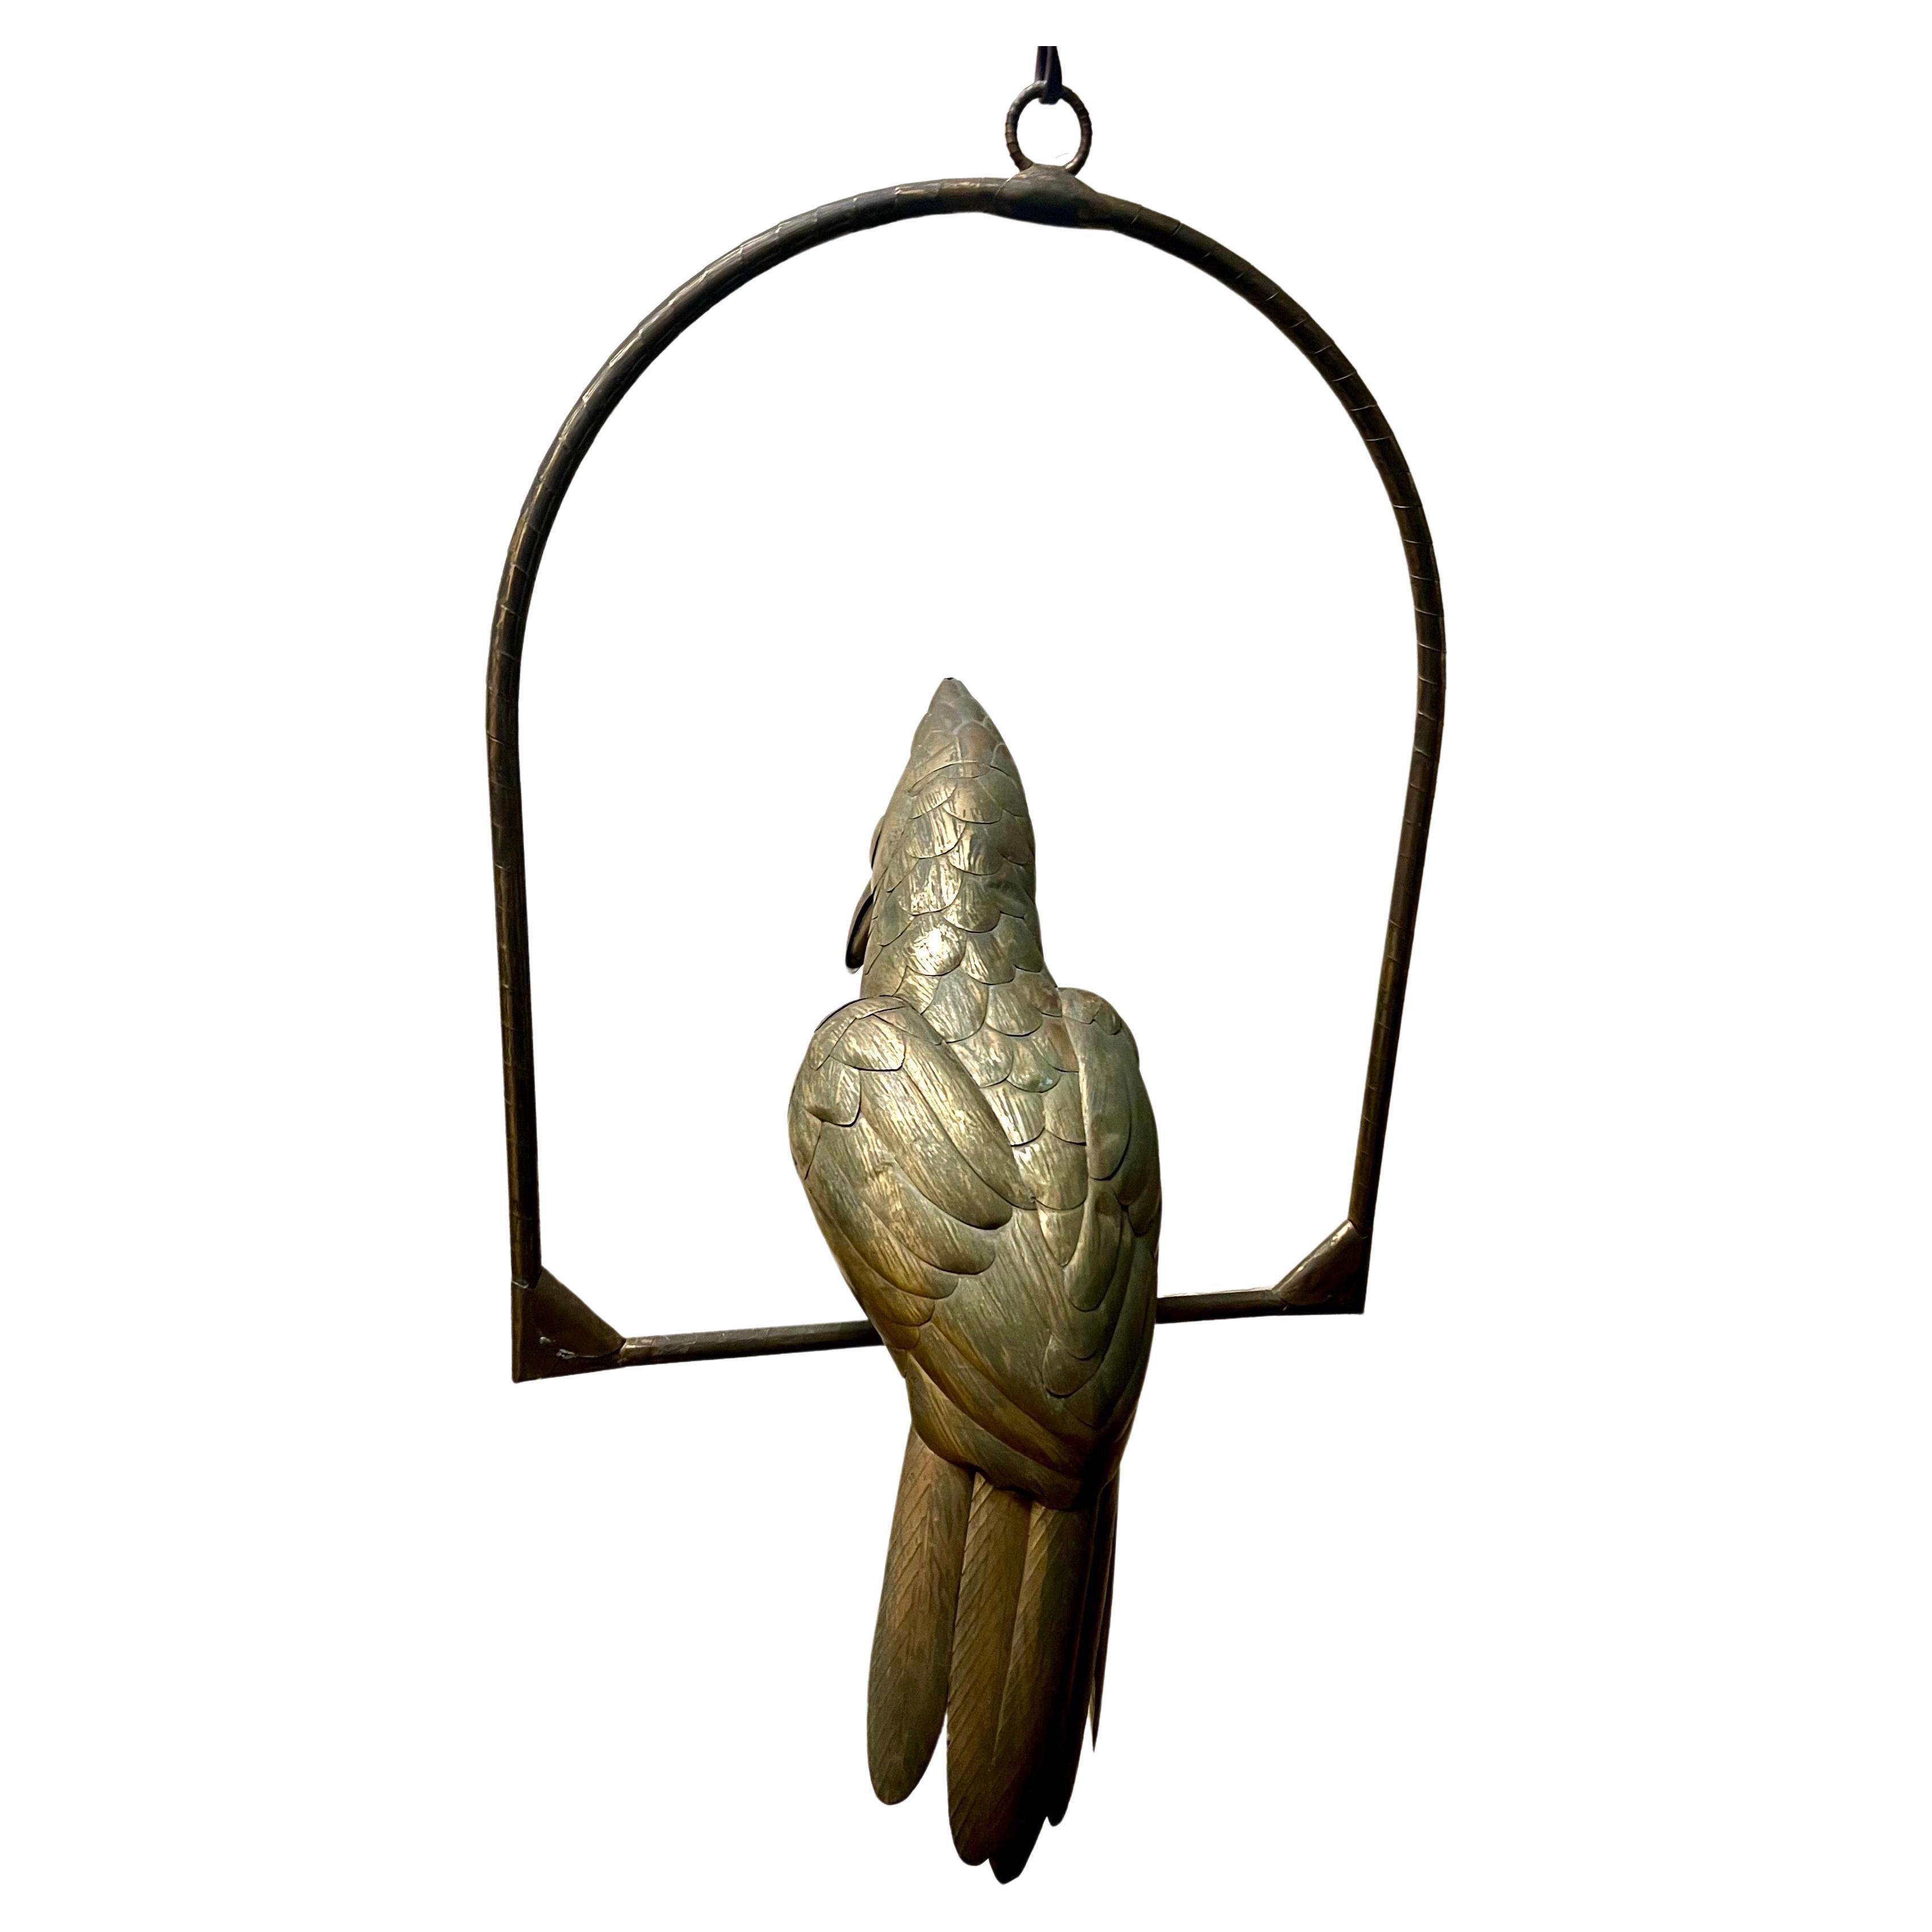  mixed metals (copper, brass parrot bird sculpture on a hanging perch by noted Mexican artist, Sergio Bustamante, circa 1970's. Nice patina small dent due to age can be polished .
